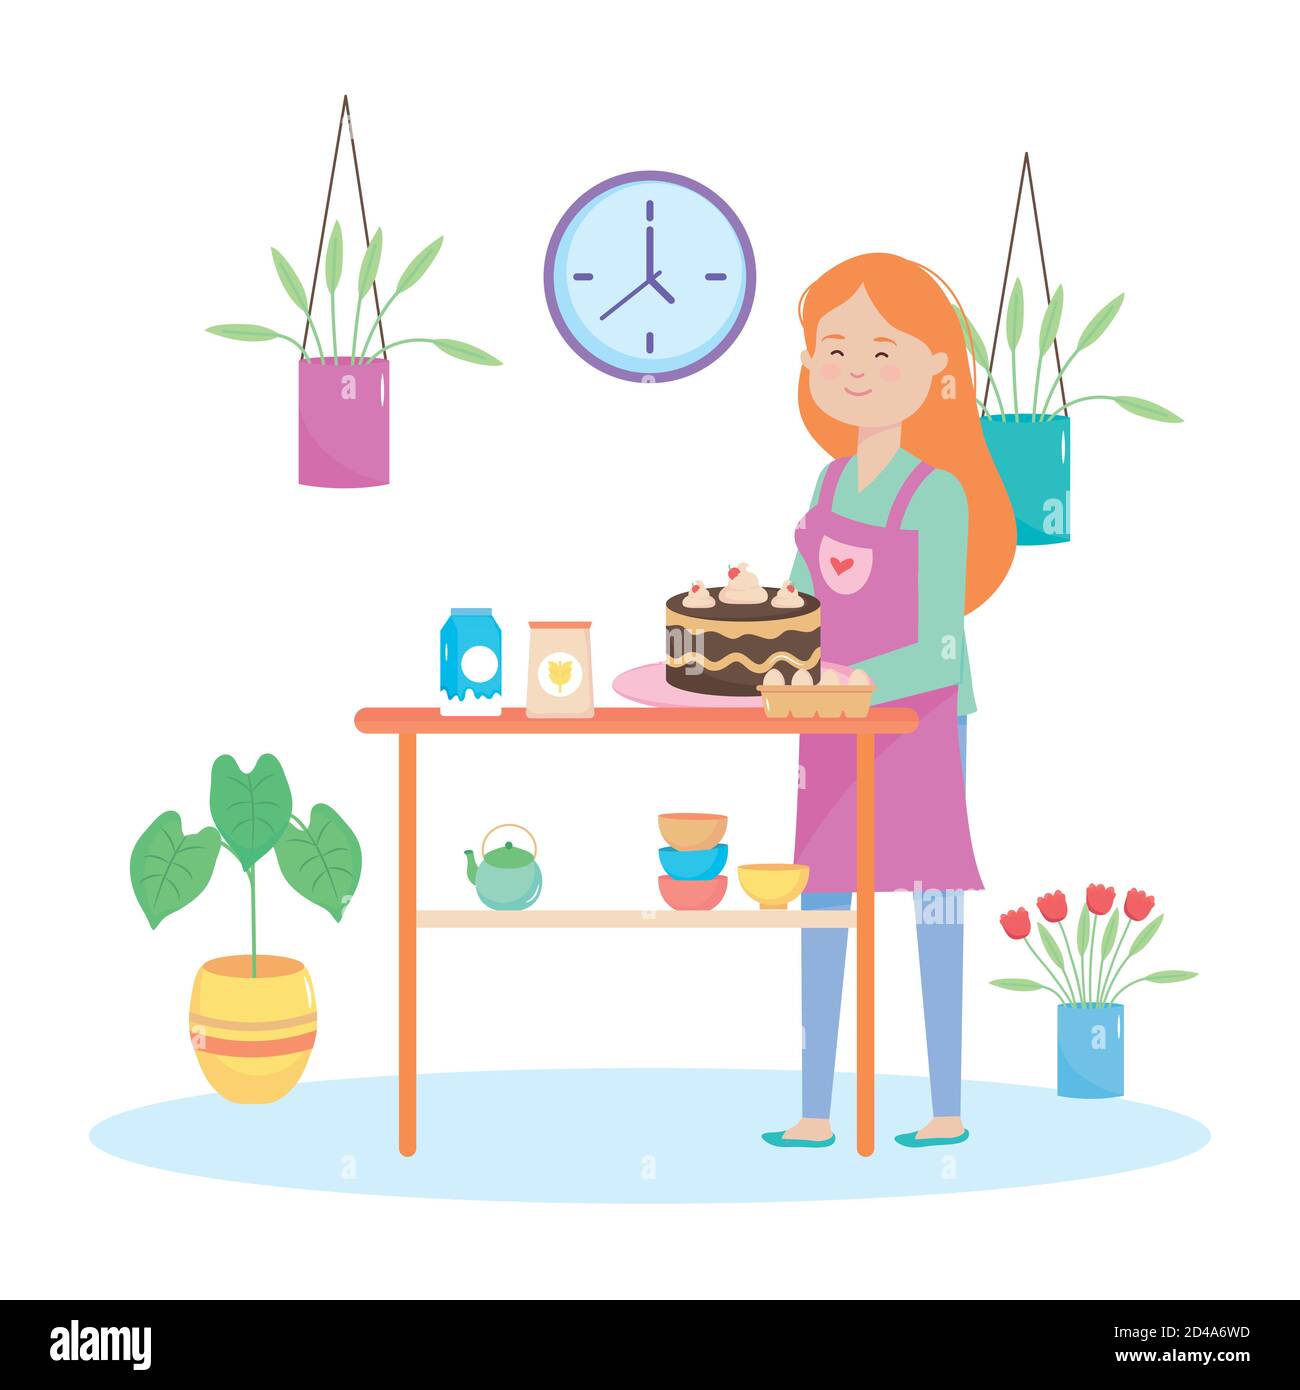 quarantine concept, happy woman holding a cake with plants around over white background, colorful design, vector illustration Stock Vector